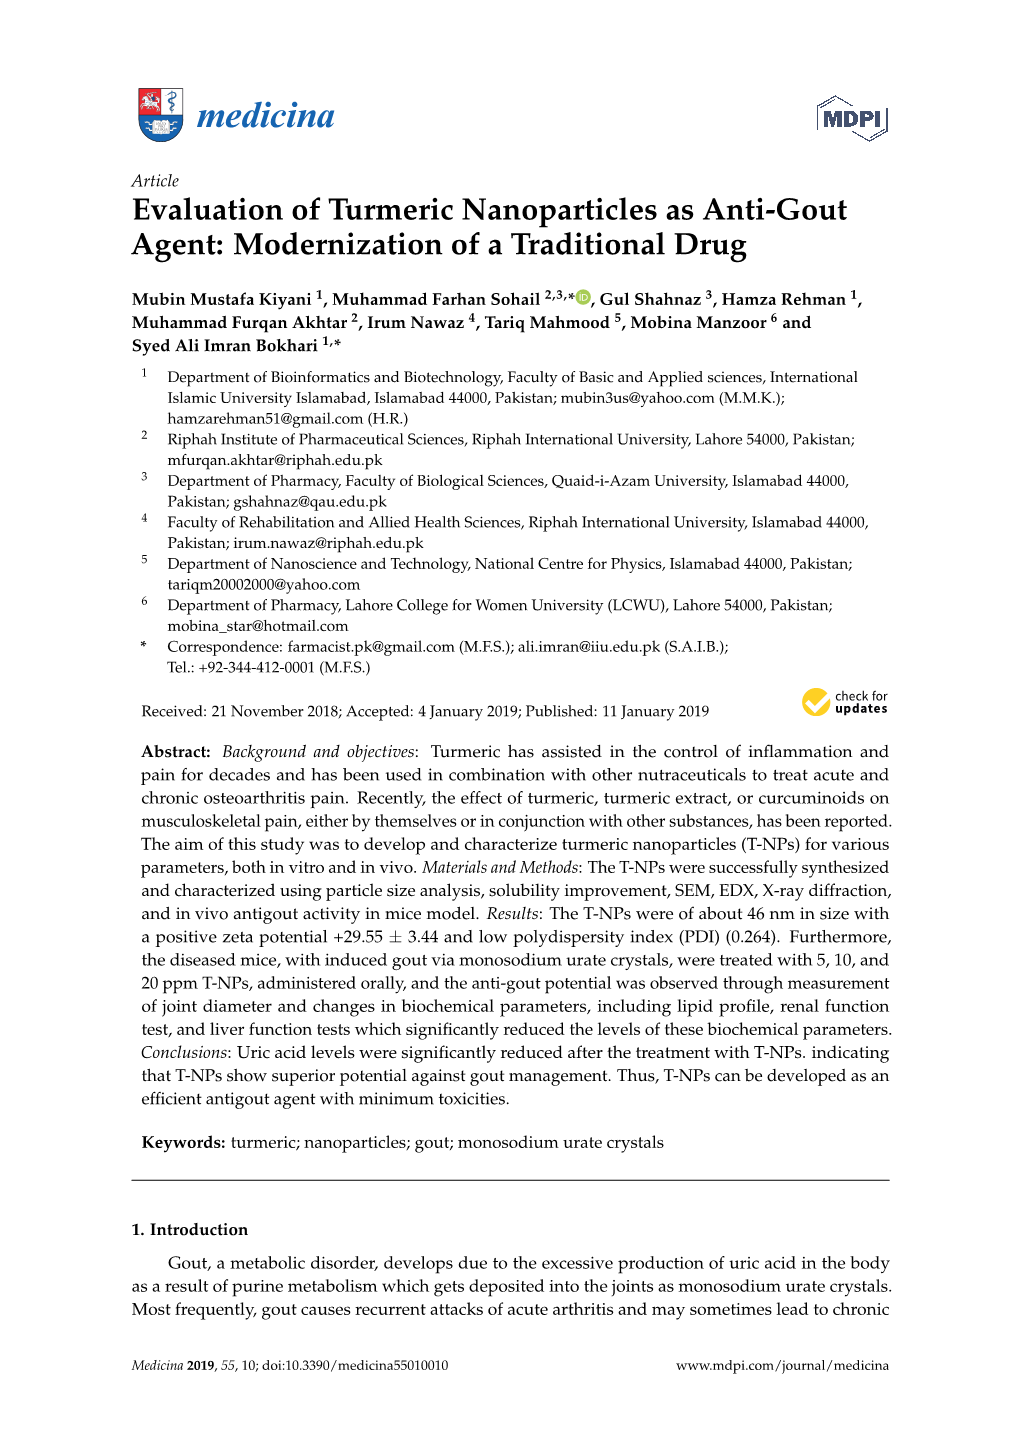 Evaluation of Turmeric Nanoparticles As Anti-Gout Agent: Modernization of a Traditional Drug